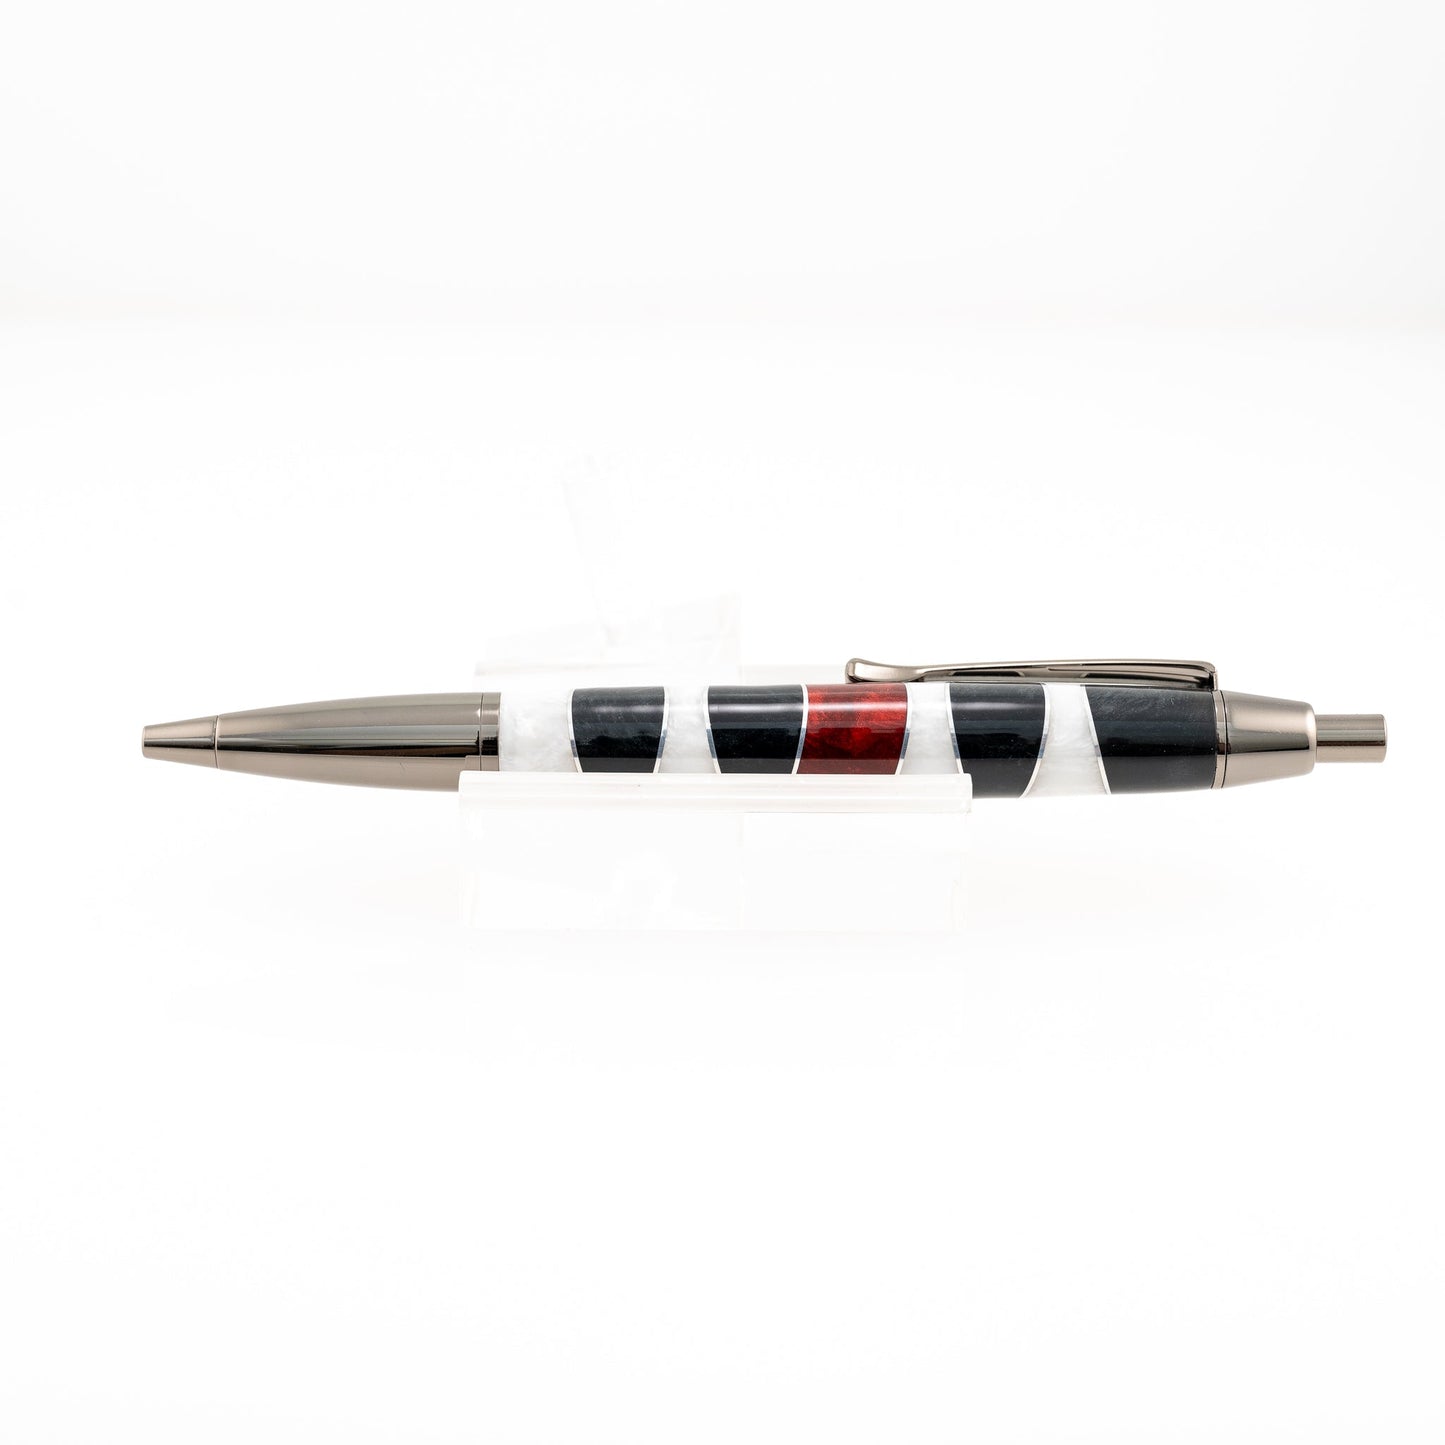 Handmade Black, White and Ruby Red segmented by aluminum resin click pen in gunmetal plating